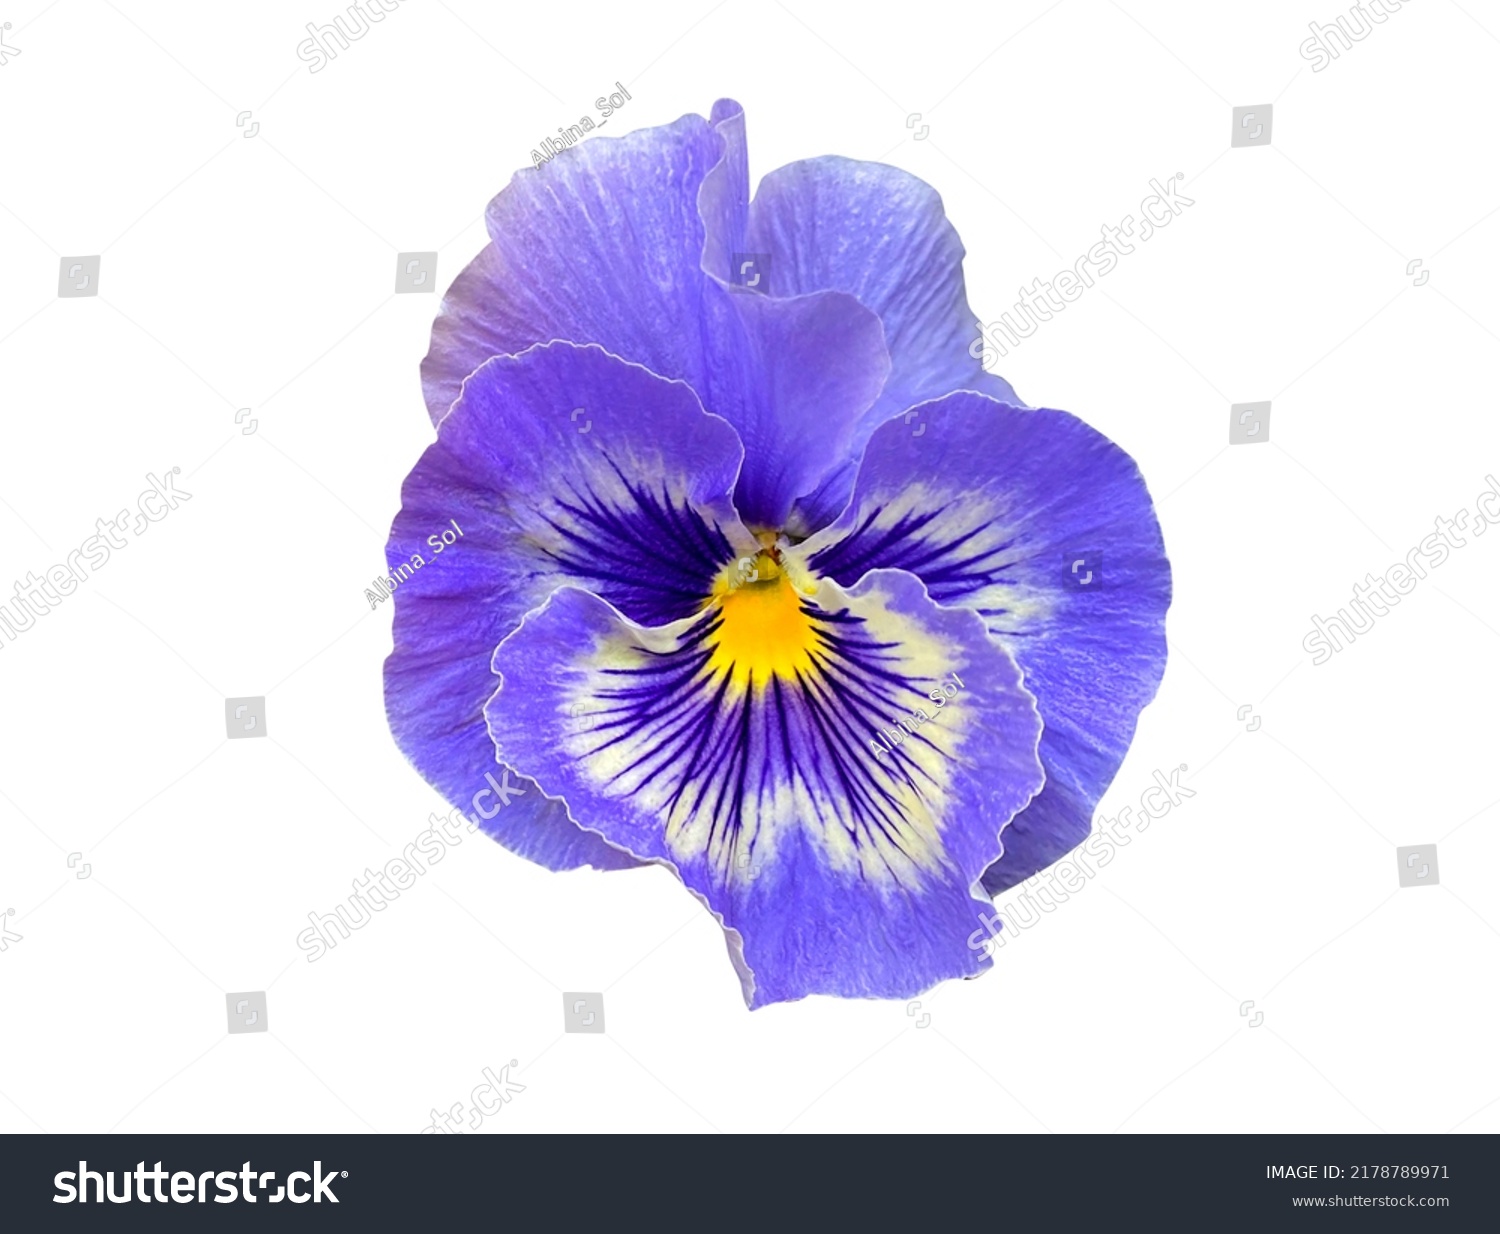 Closeup blue pansy flower isolated on white background. Bright heartsease garden icon. Blooming Viola wirttrockiana plants cut out element for design. Viola cornuta Hansa in bloom close up cutout #2178789971